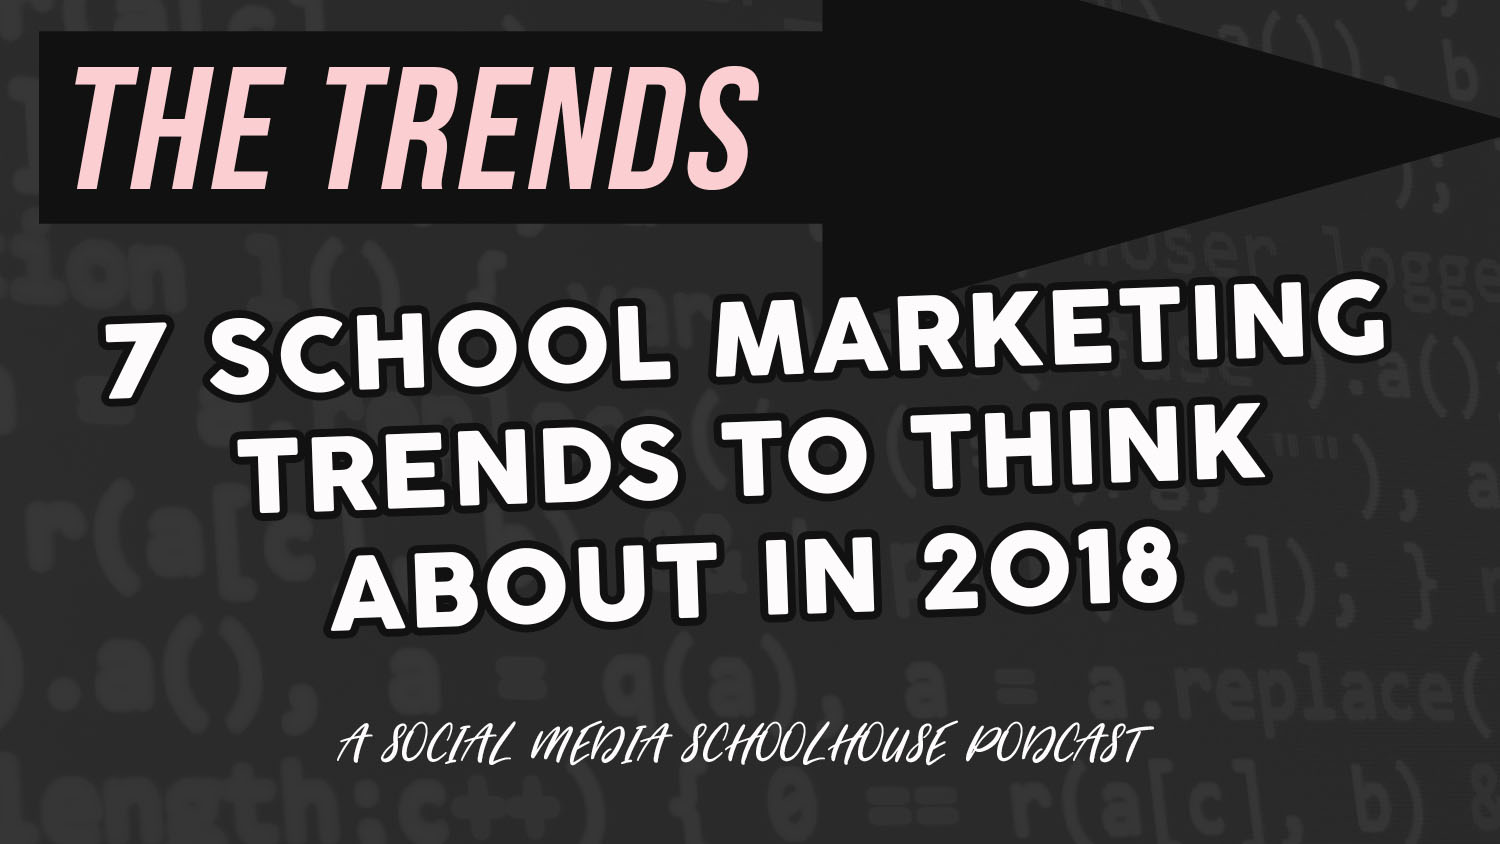 7 School Marketing Trends to Think About for 2018